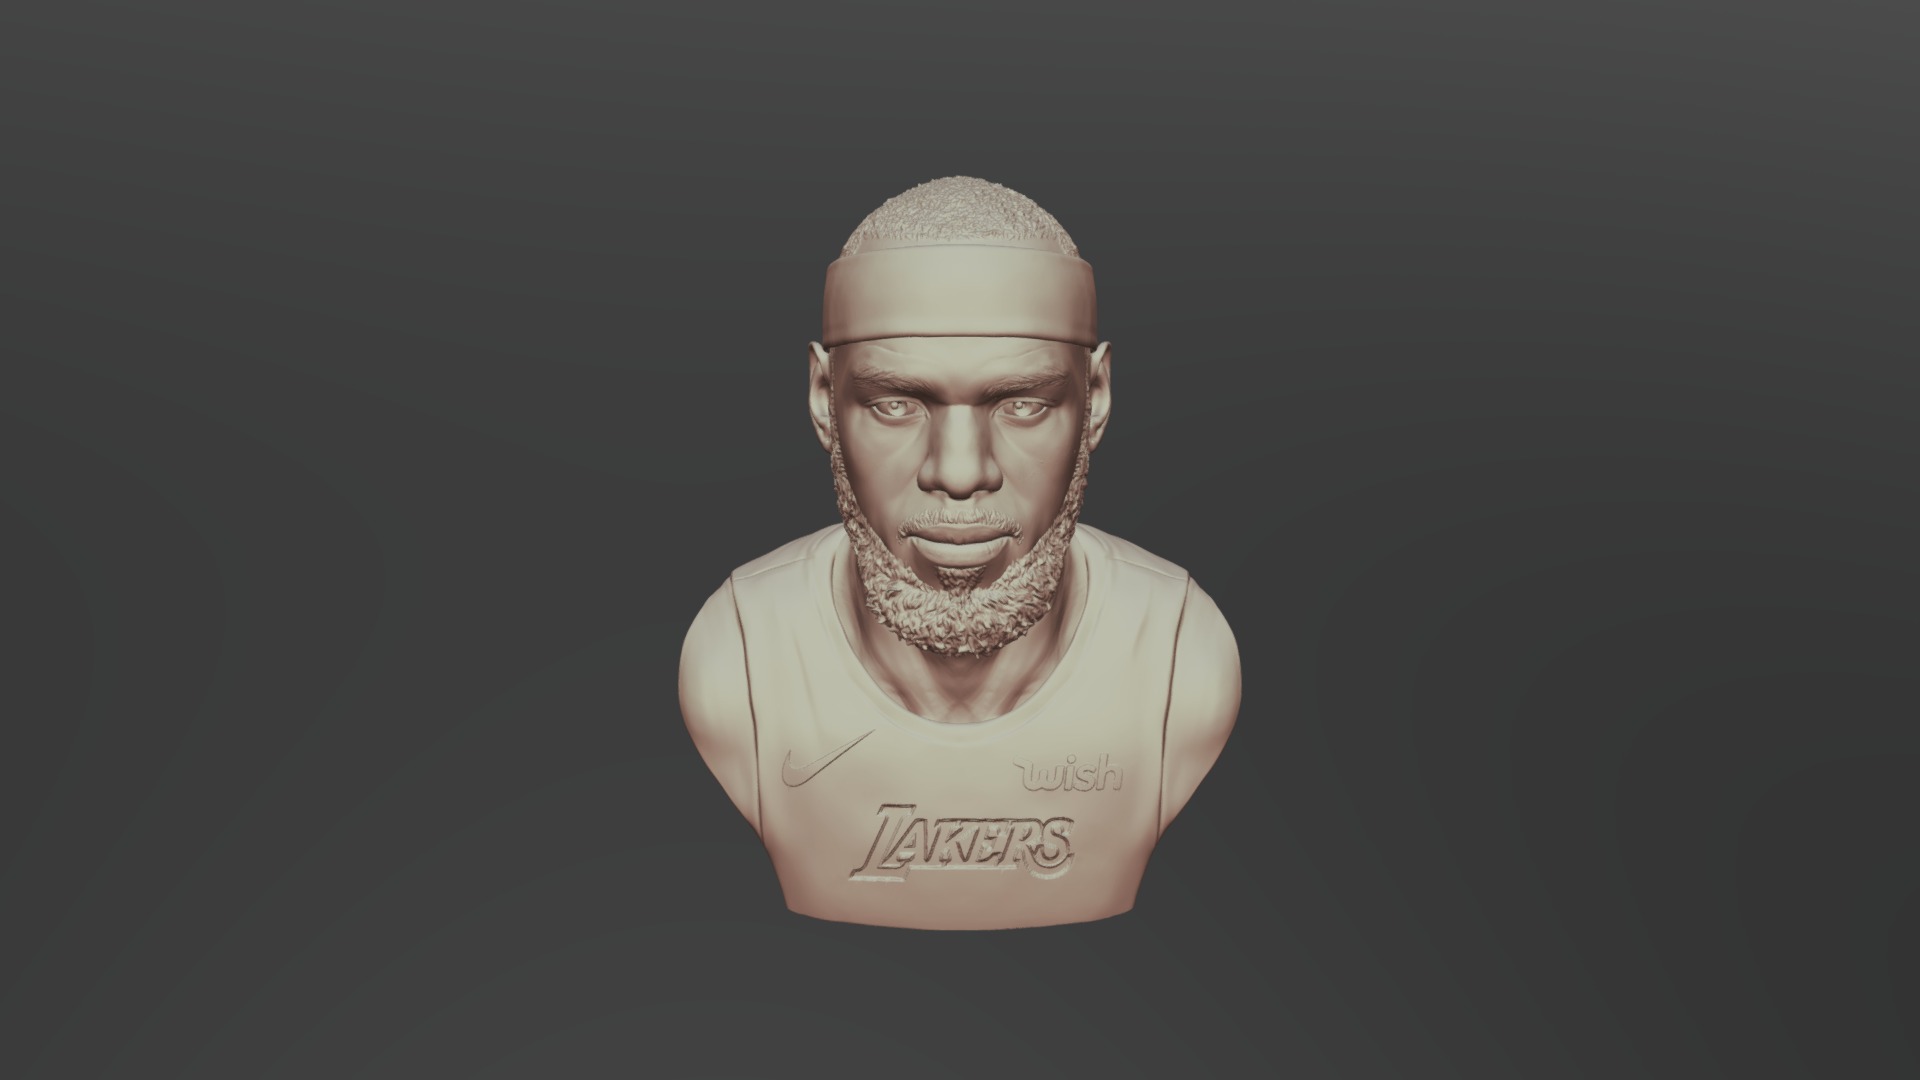 3D model Lebron James in Lakers jersey Ready to 3D print - This is a 3D model of the Lebron James in Lakers jersey Ready to 3D print. The 3D model is about a person with a beard.